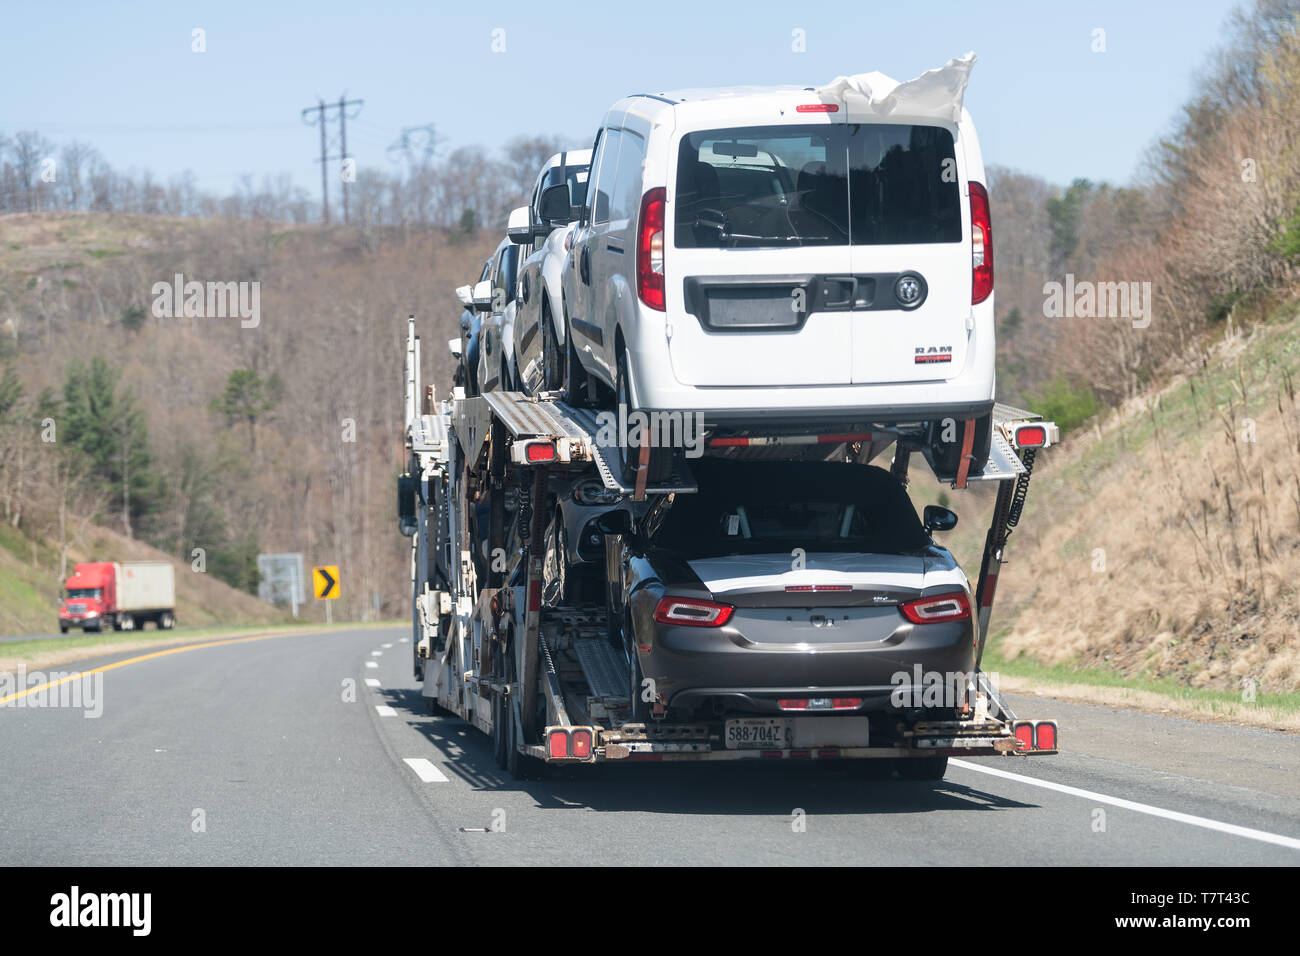 Linden, USA - April 18, 2018: Interstate highway 66 West in Virginia with cars traffic and hauler cargo truck hauling many new cars in trailer carriag Stock Photo